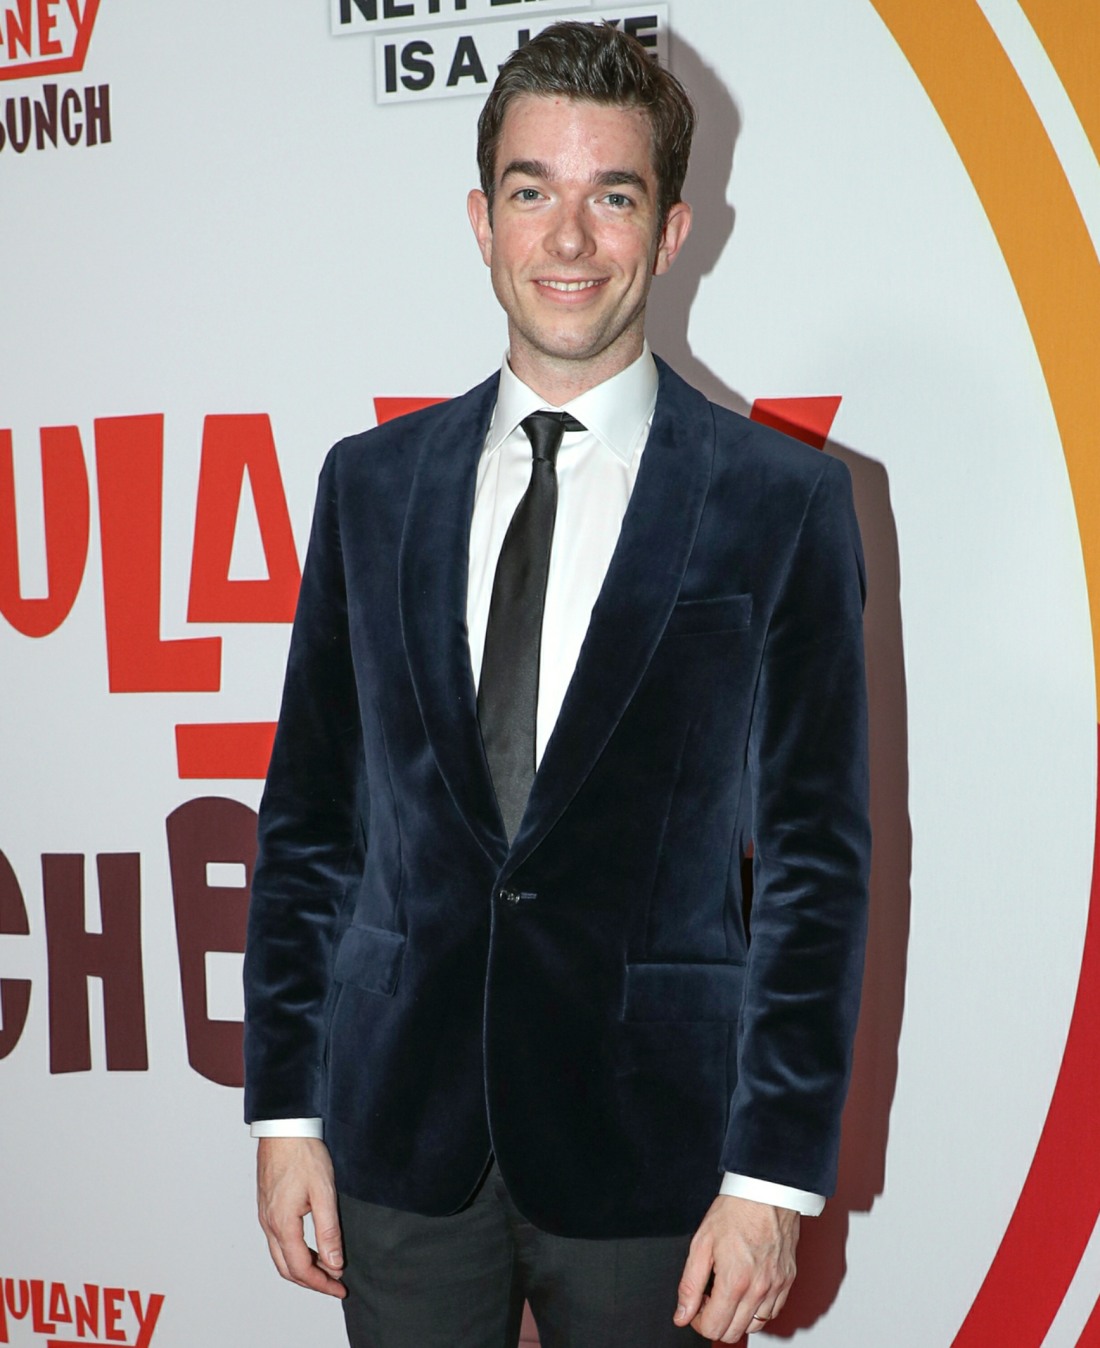 John Mulaney The Sack Lunch Bunch NY Special Screening